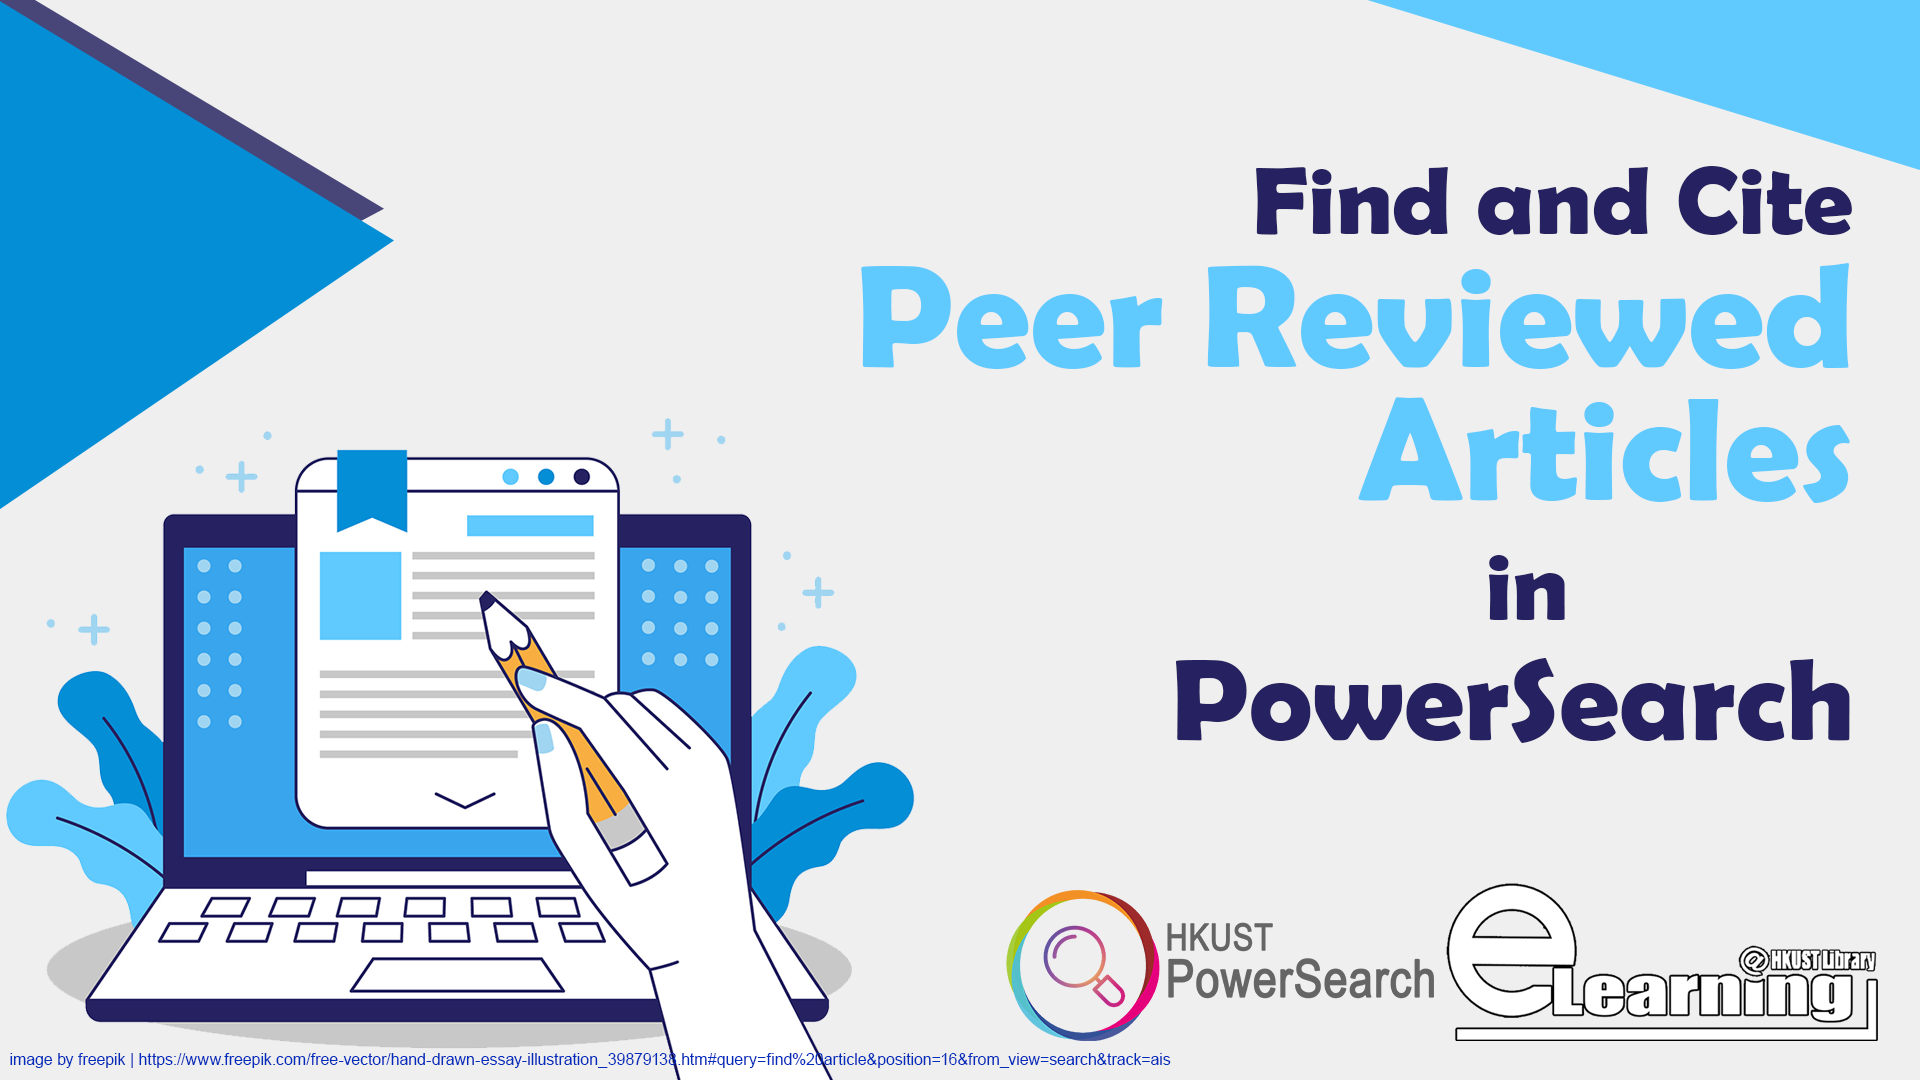 Find and Cite Peer Reviewed Articles in PowerSearch(00:01:14)